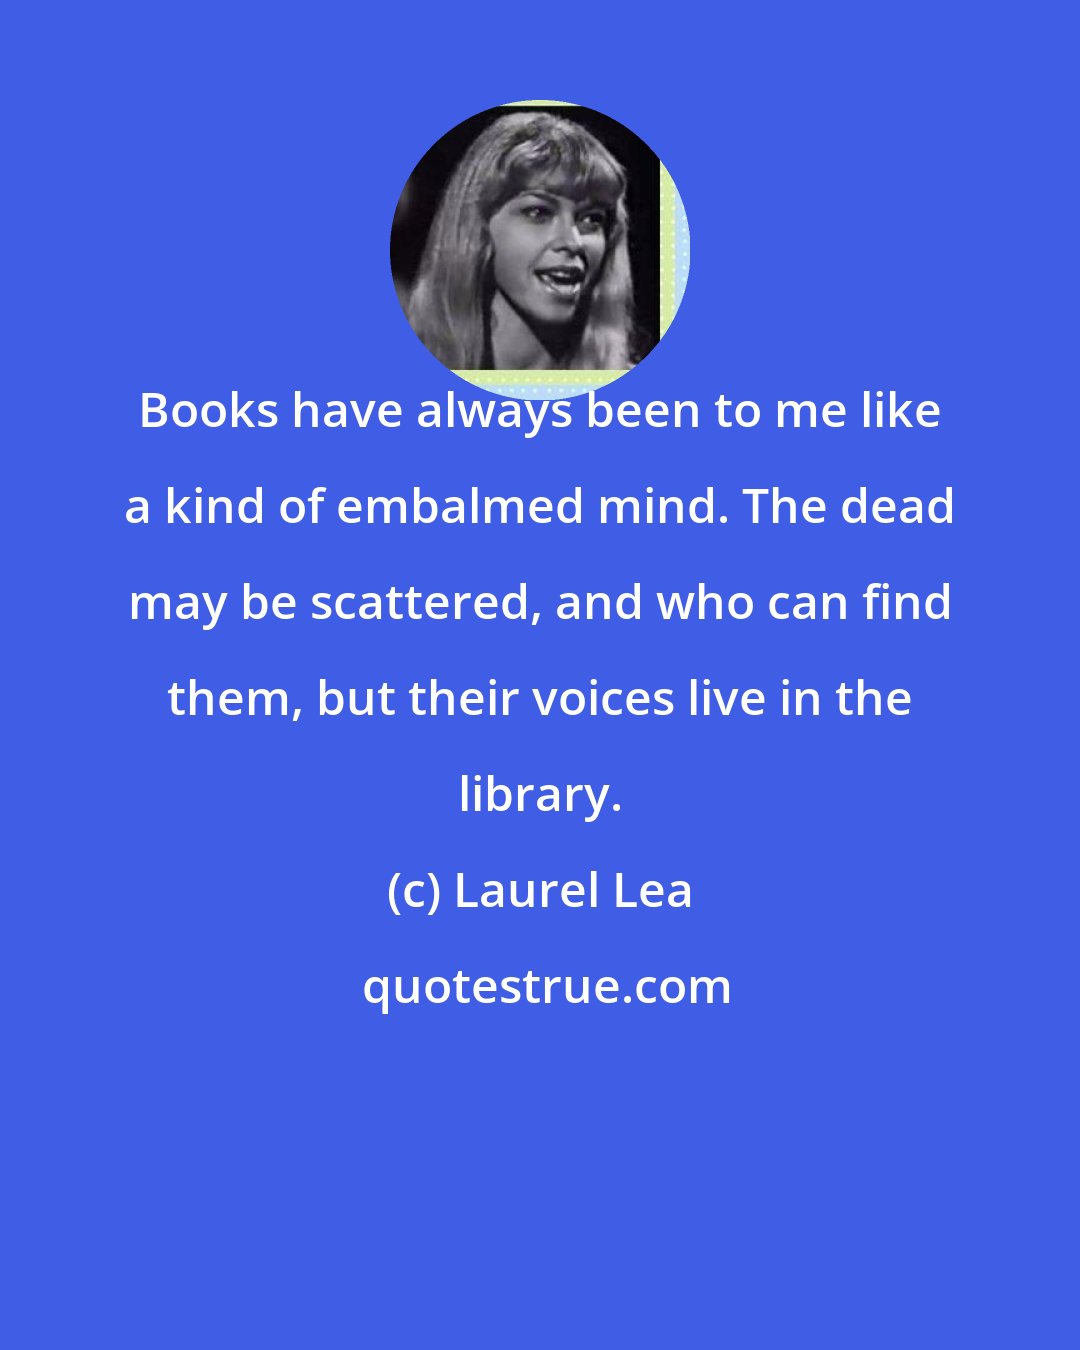 Laurel Lea: Books have always been to me like a kind of embalmed mind. The dead may be scattered, and who can find them, but their voices live in the library.